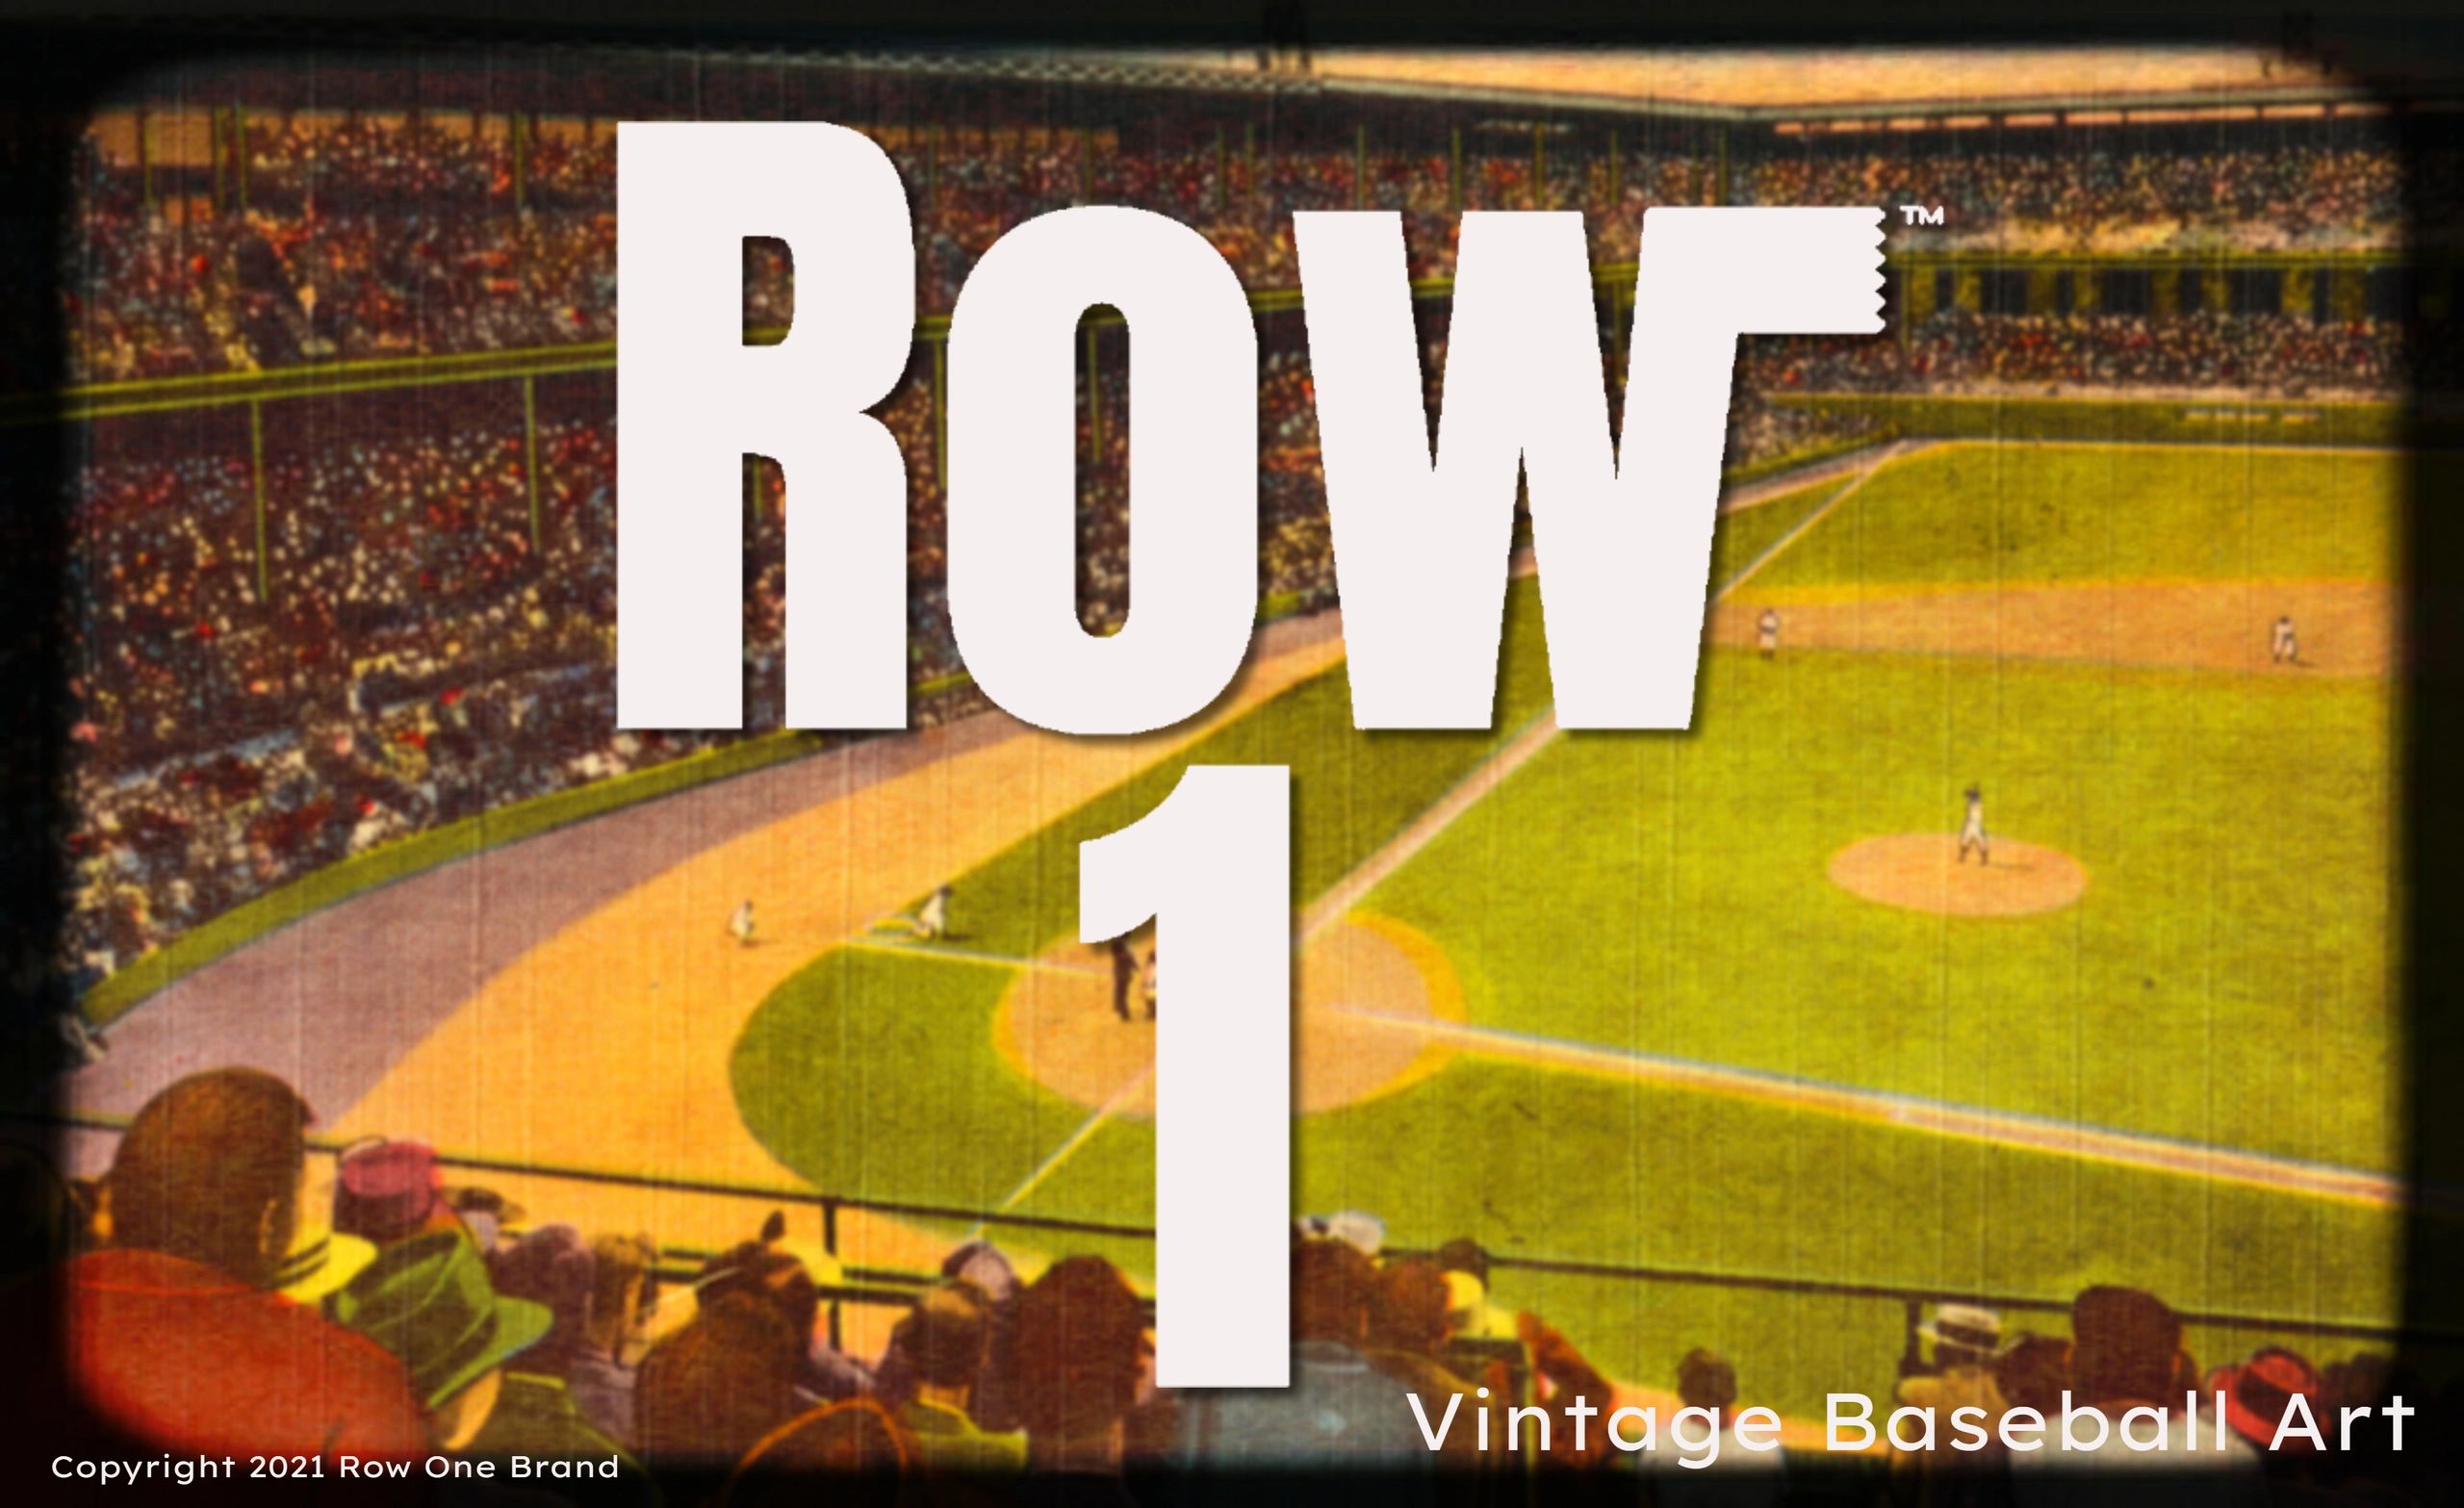 Vintage Red Sox Art - Row One Brand